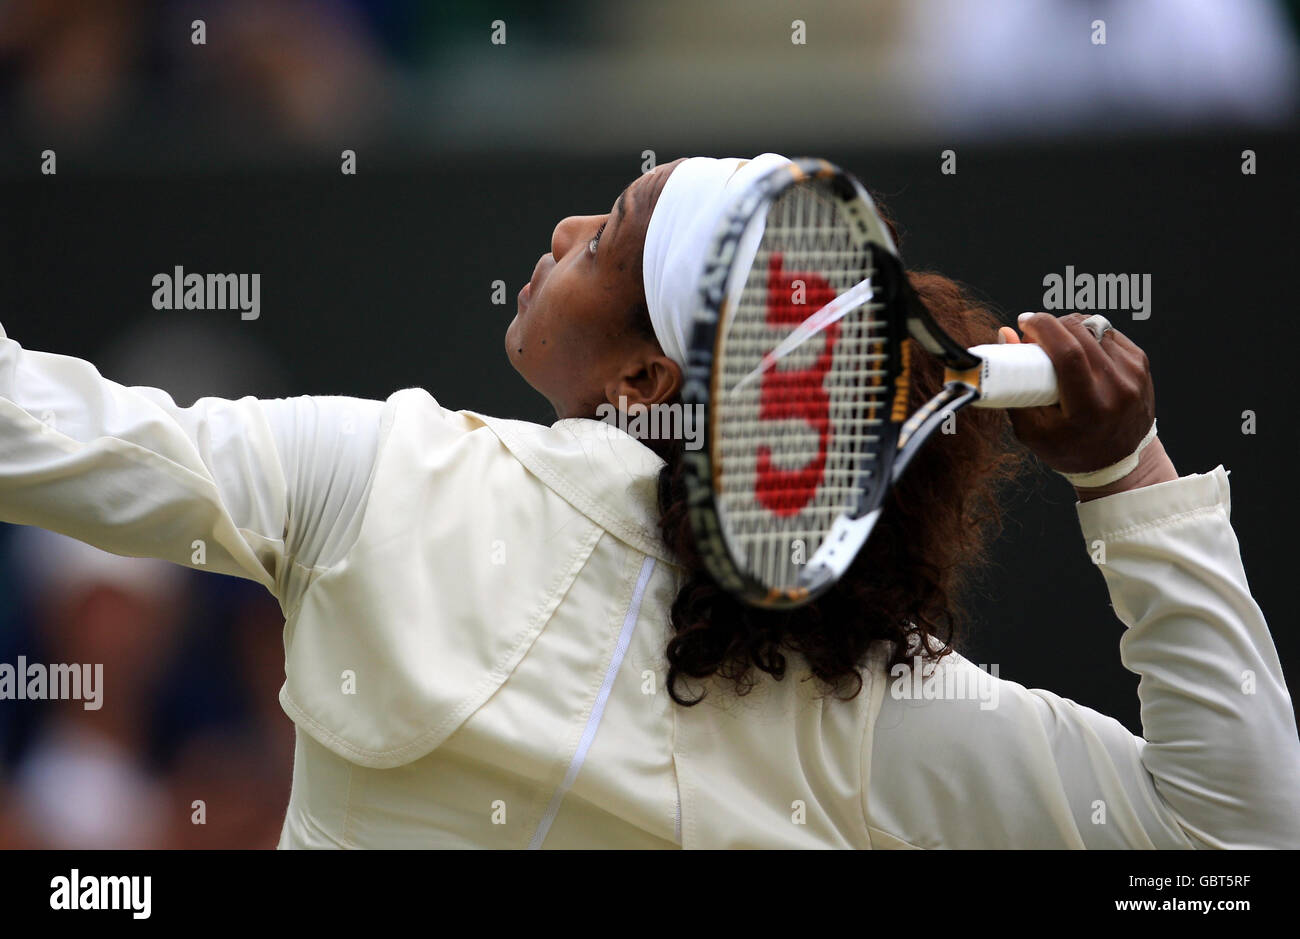 USA's Serena Williams before her match against Italy's Roberta Vinci during the 2009 Wimbledon Championships at the All England Lawn Tennis and Croquet Club, Wimbledon, London. Stock Photo